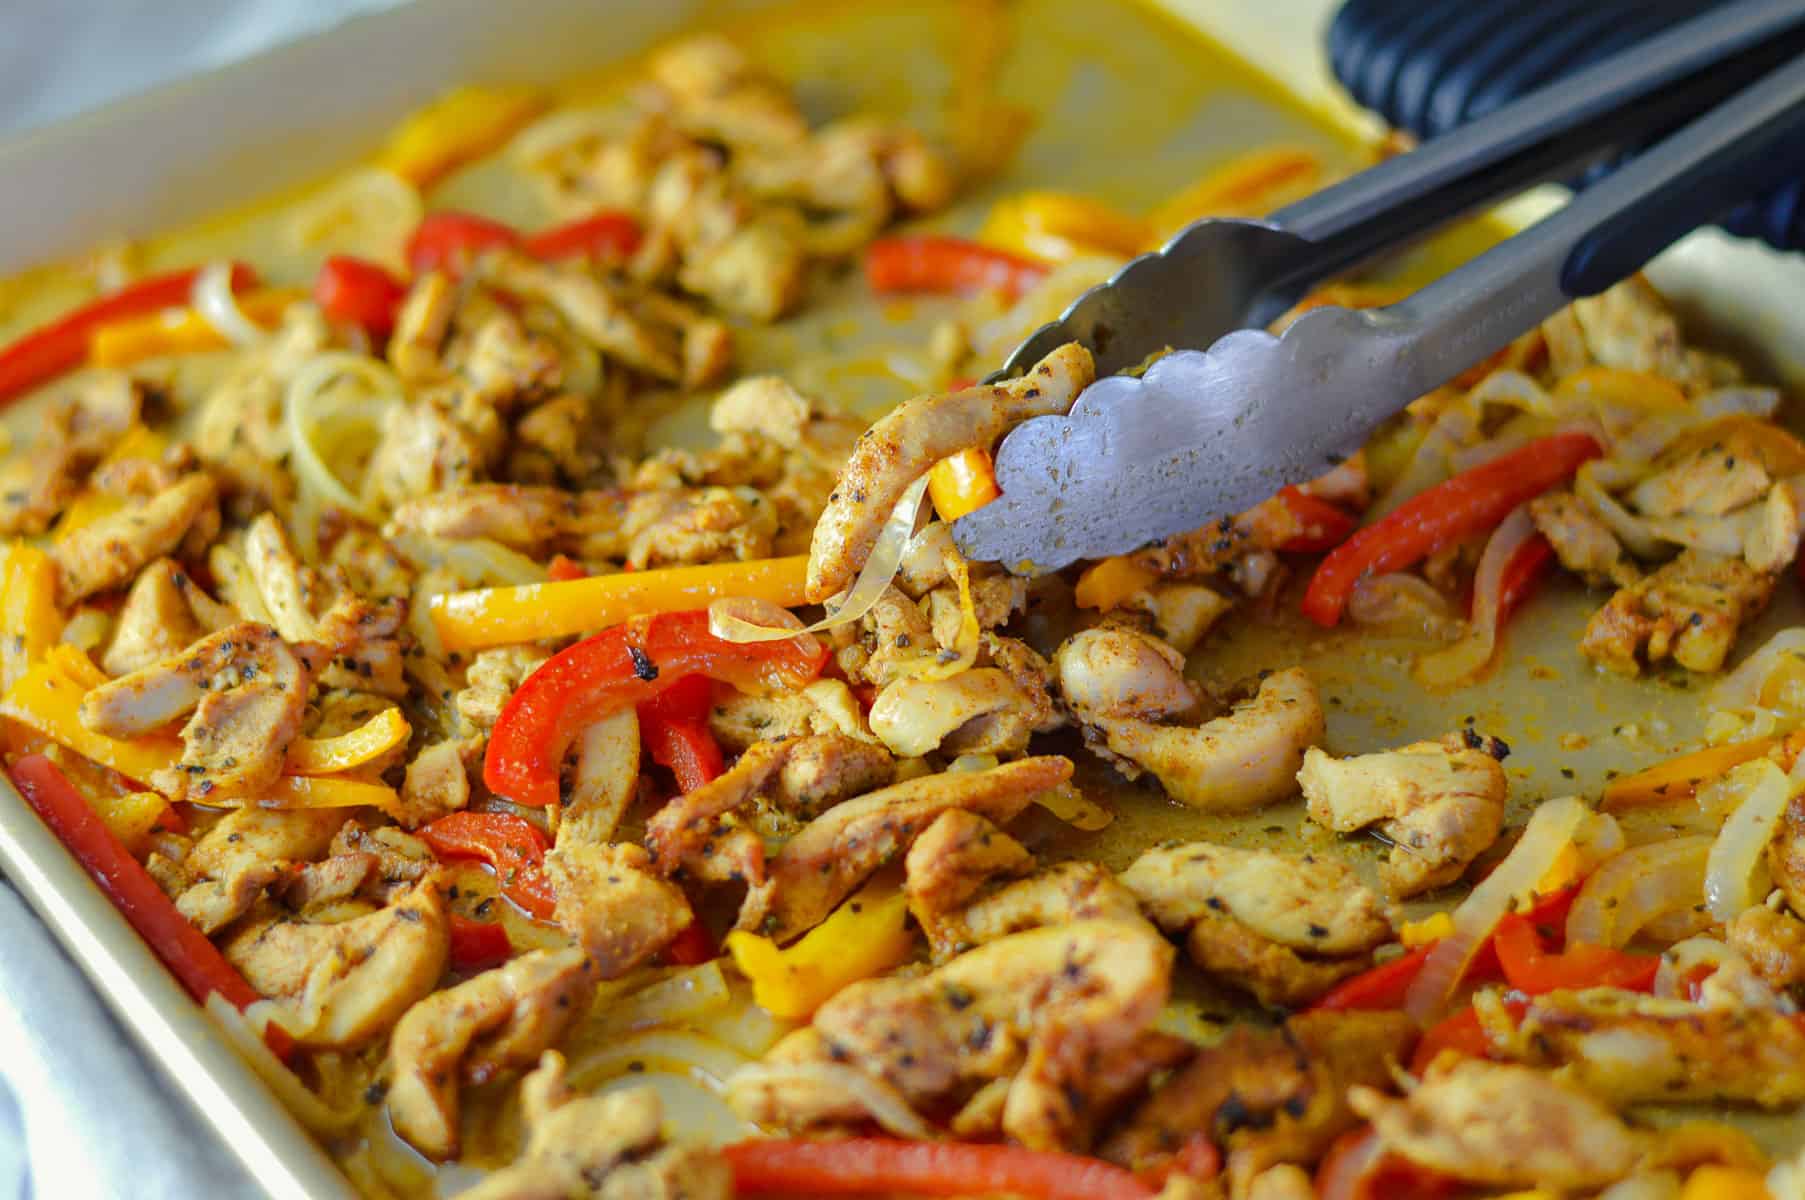 chicken fajita mixture after baking and broiling on gold sheet pan with silver tongs holding some of the mixture